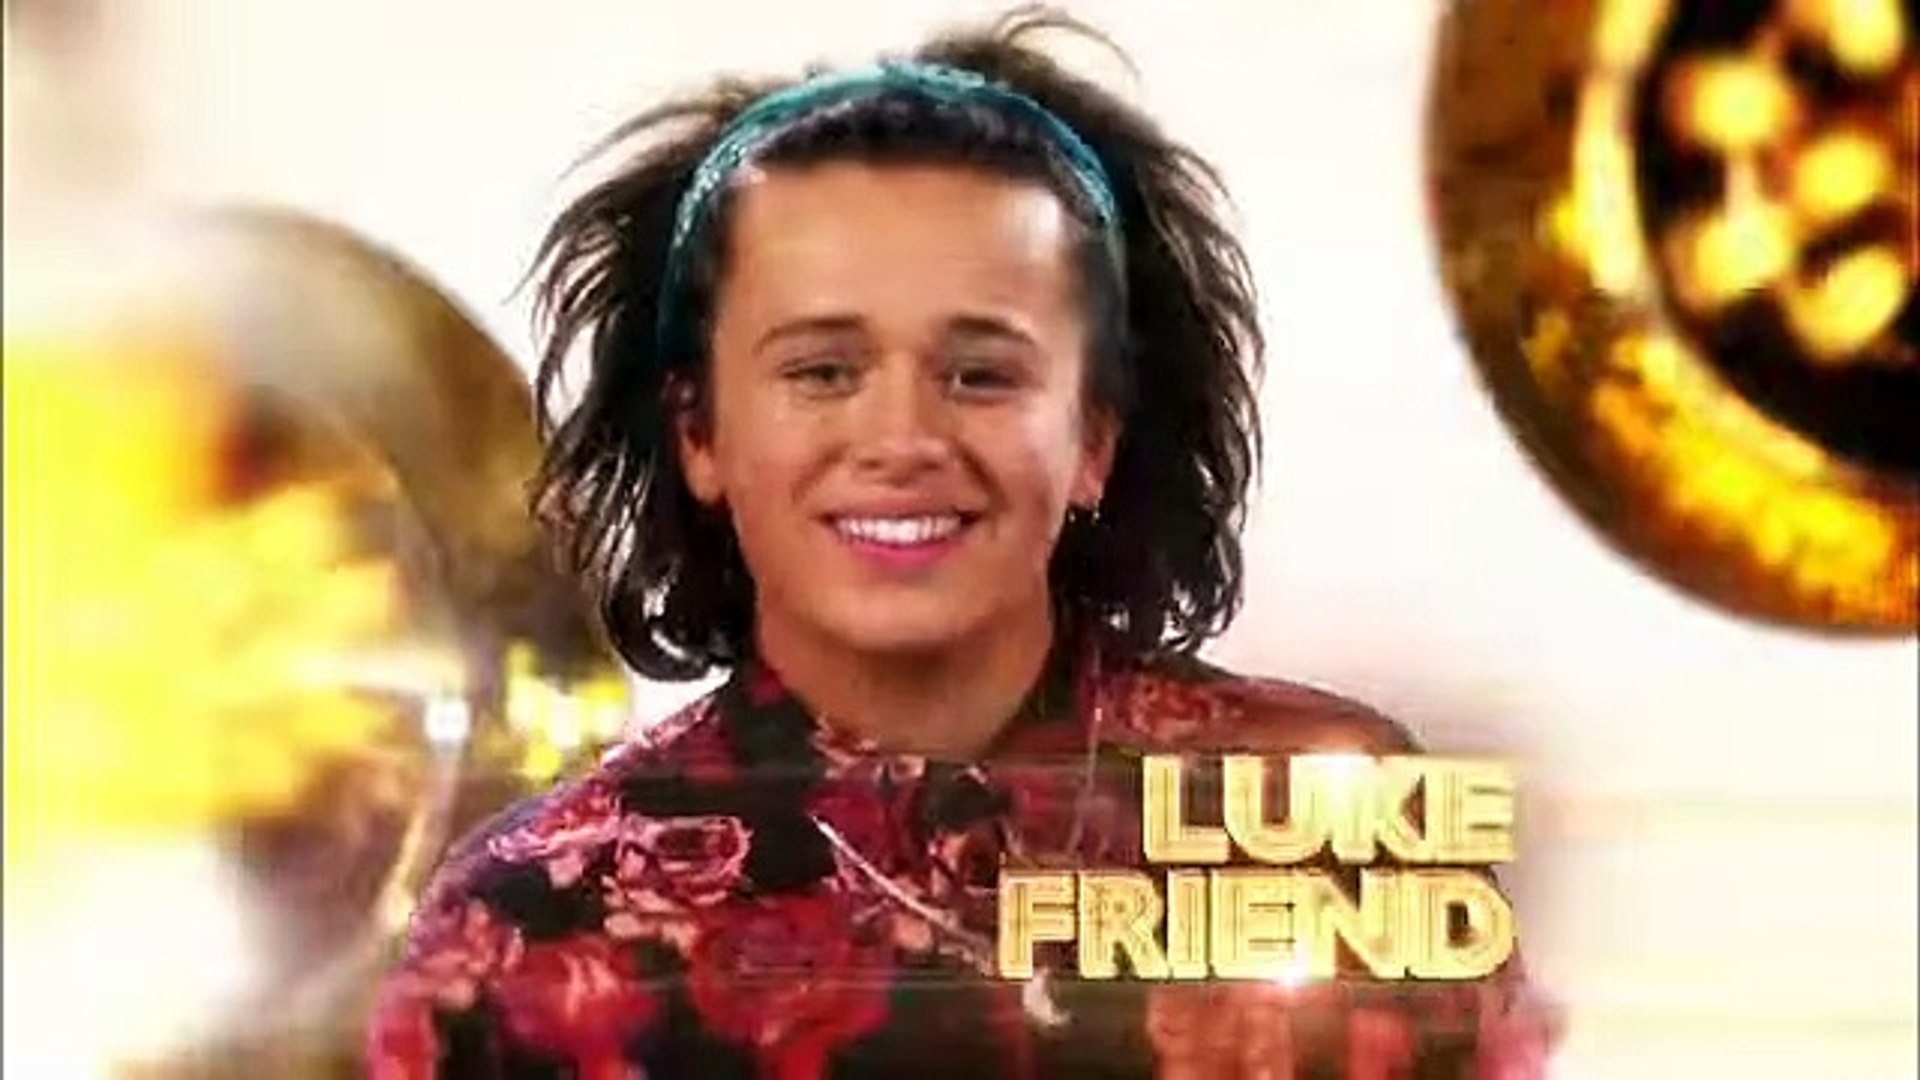 Luke Friend sings Every Breath You Take by The Police - Live Week 1 - The X Factor 2013 - Official C